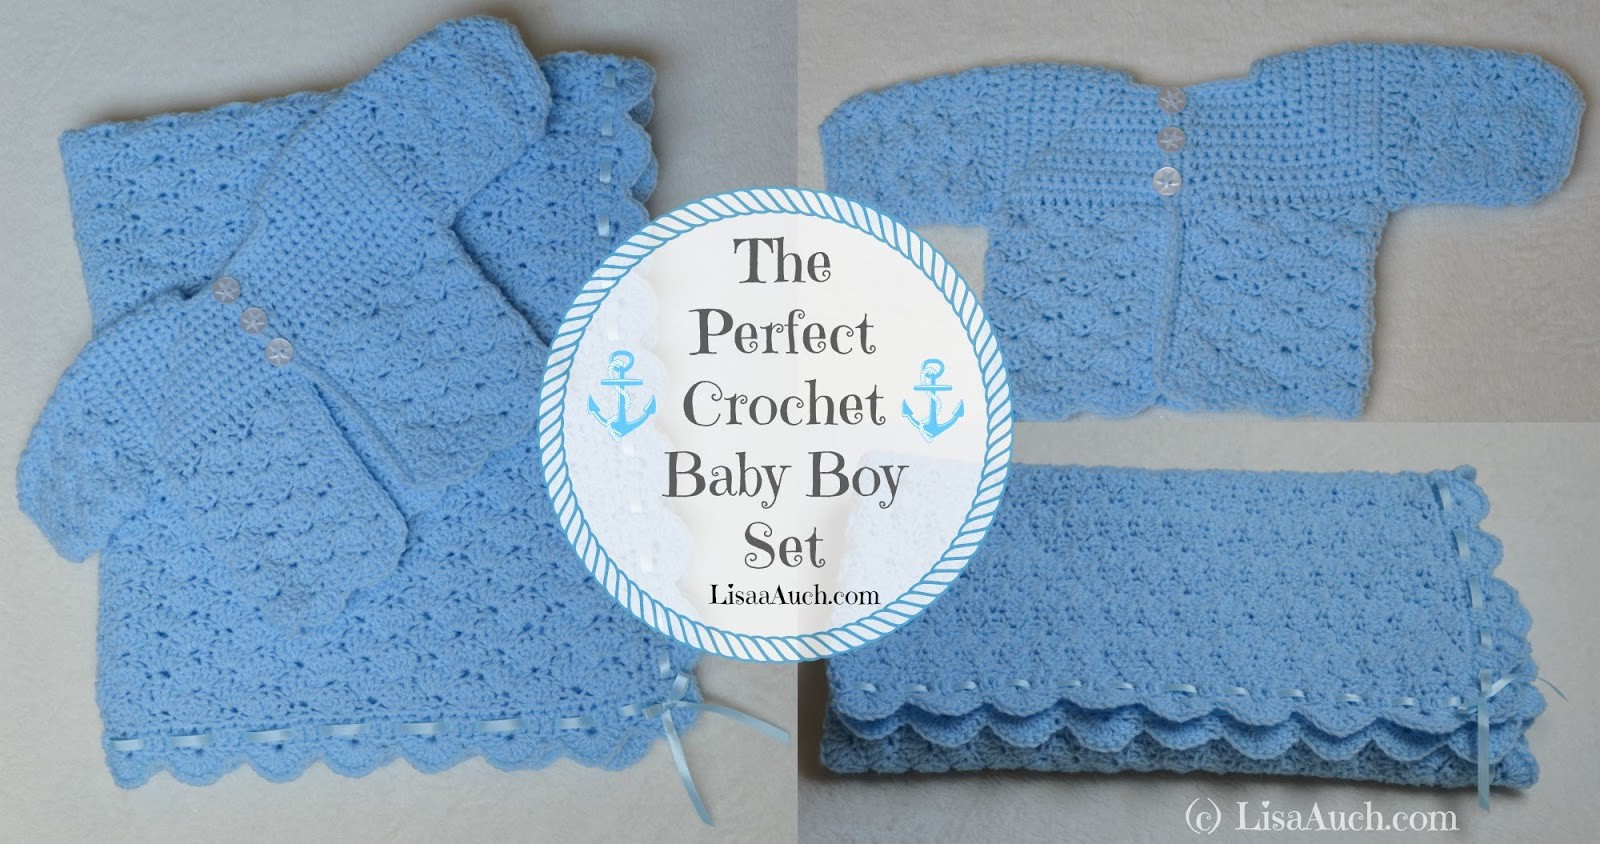 Crochet Patterns For Baby Free Crochet Patterns And Designs Lisaauch Free Crochet Patterns